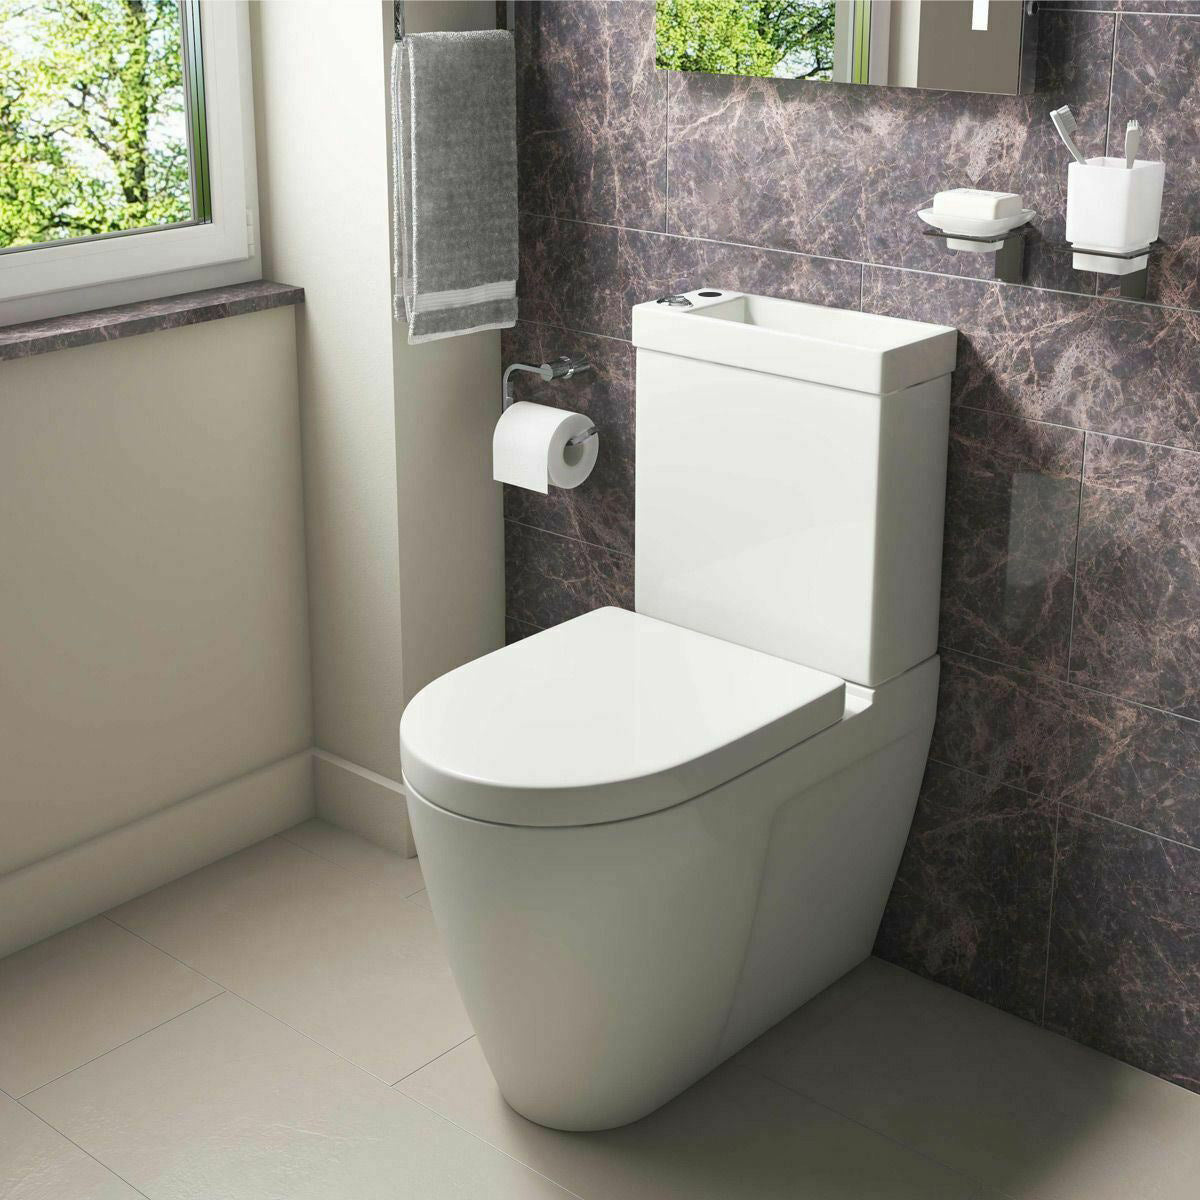 Allscot 2 in 1 Compact Basin Close Coupled Toilet Combo Space Saver Cloakroom Unit